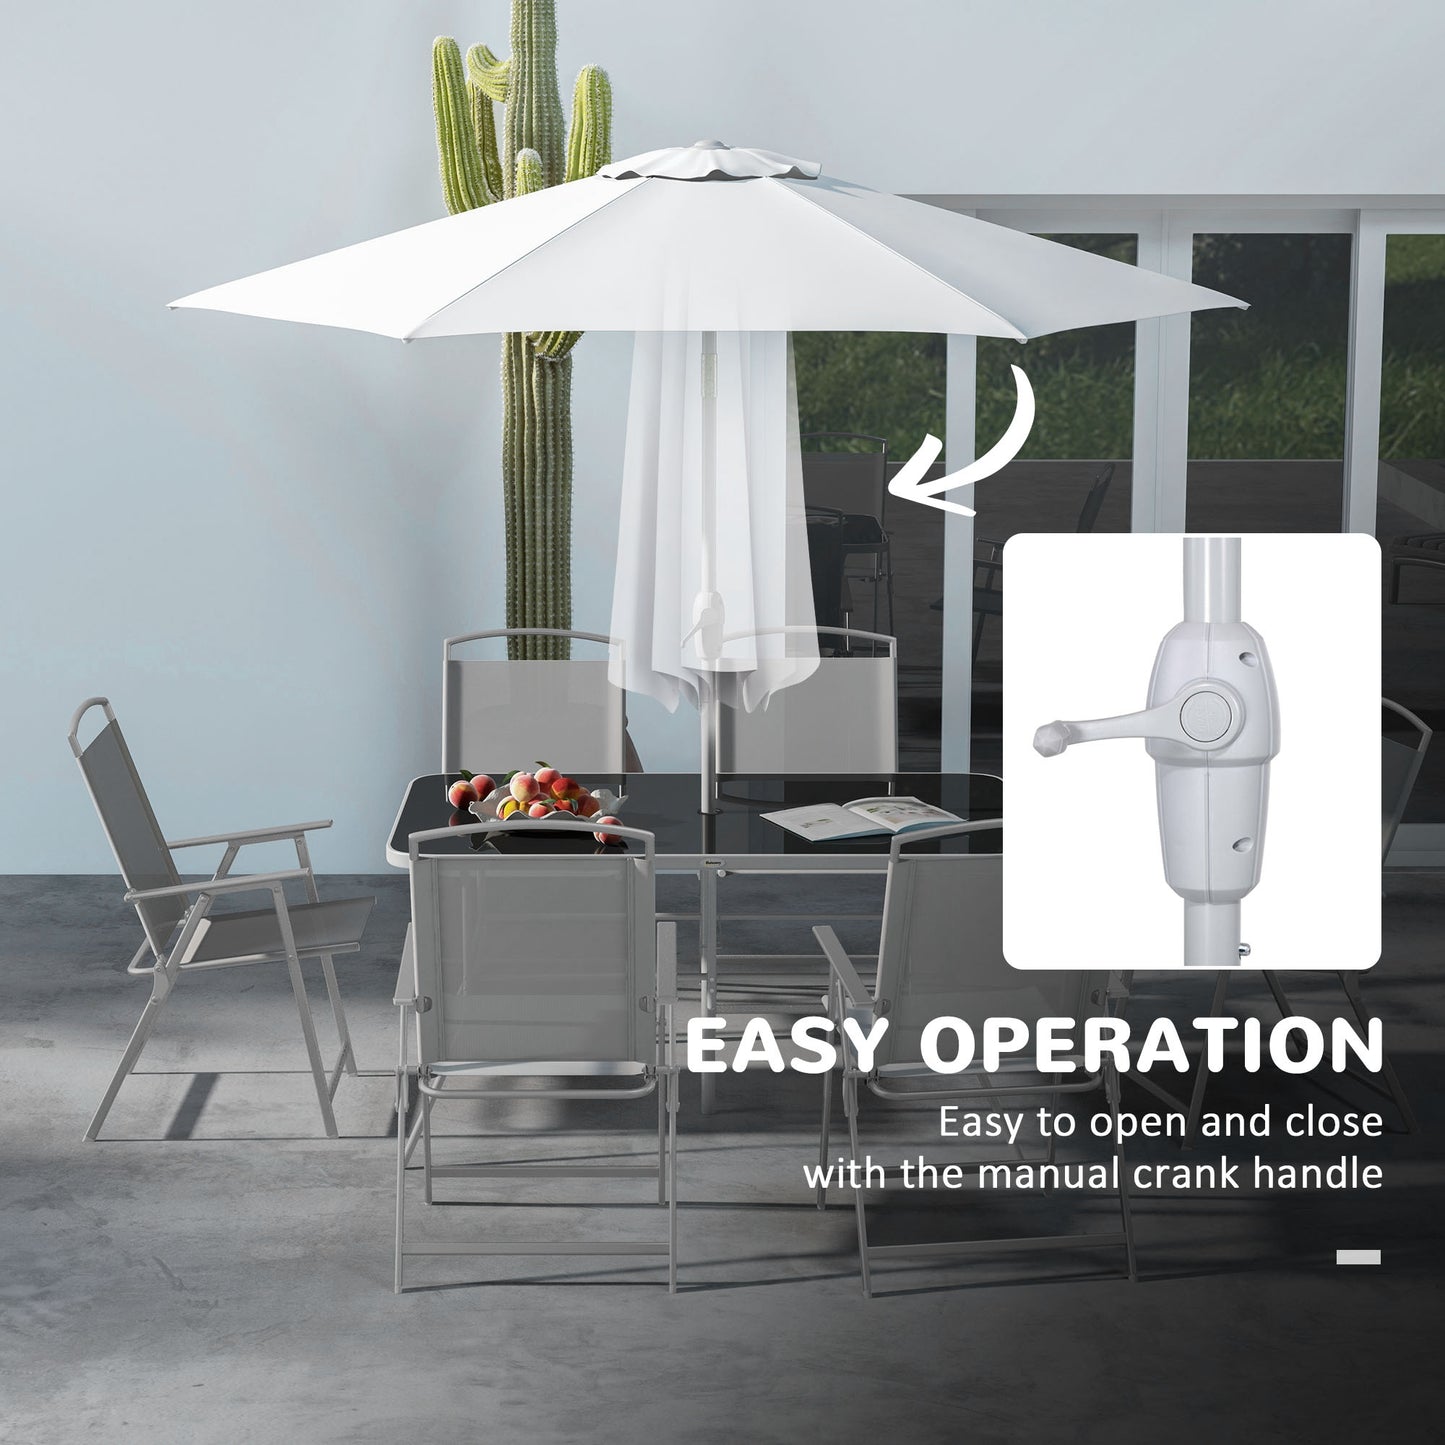 8 Piece Patio Set with Umbrella, 6 Folding Chairs, Rectangle Table, Outdoor Dining Set for 6 with Mesh Seat, Grey - Gallery Canada